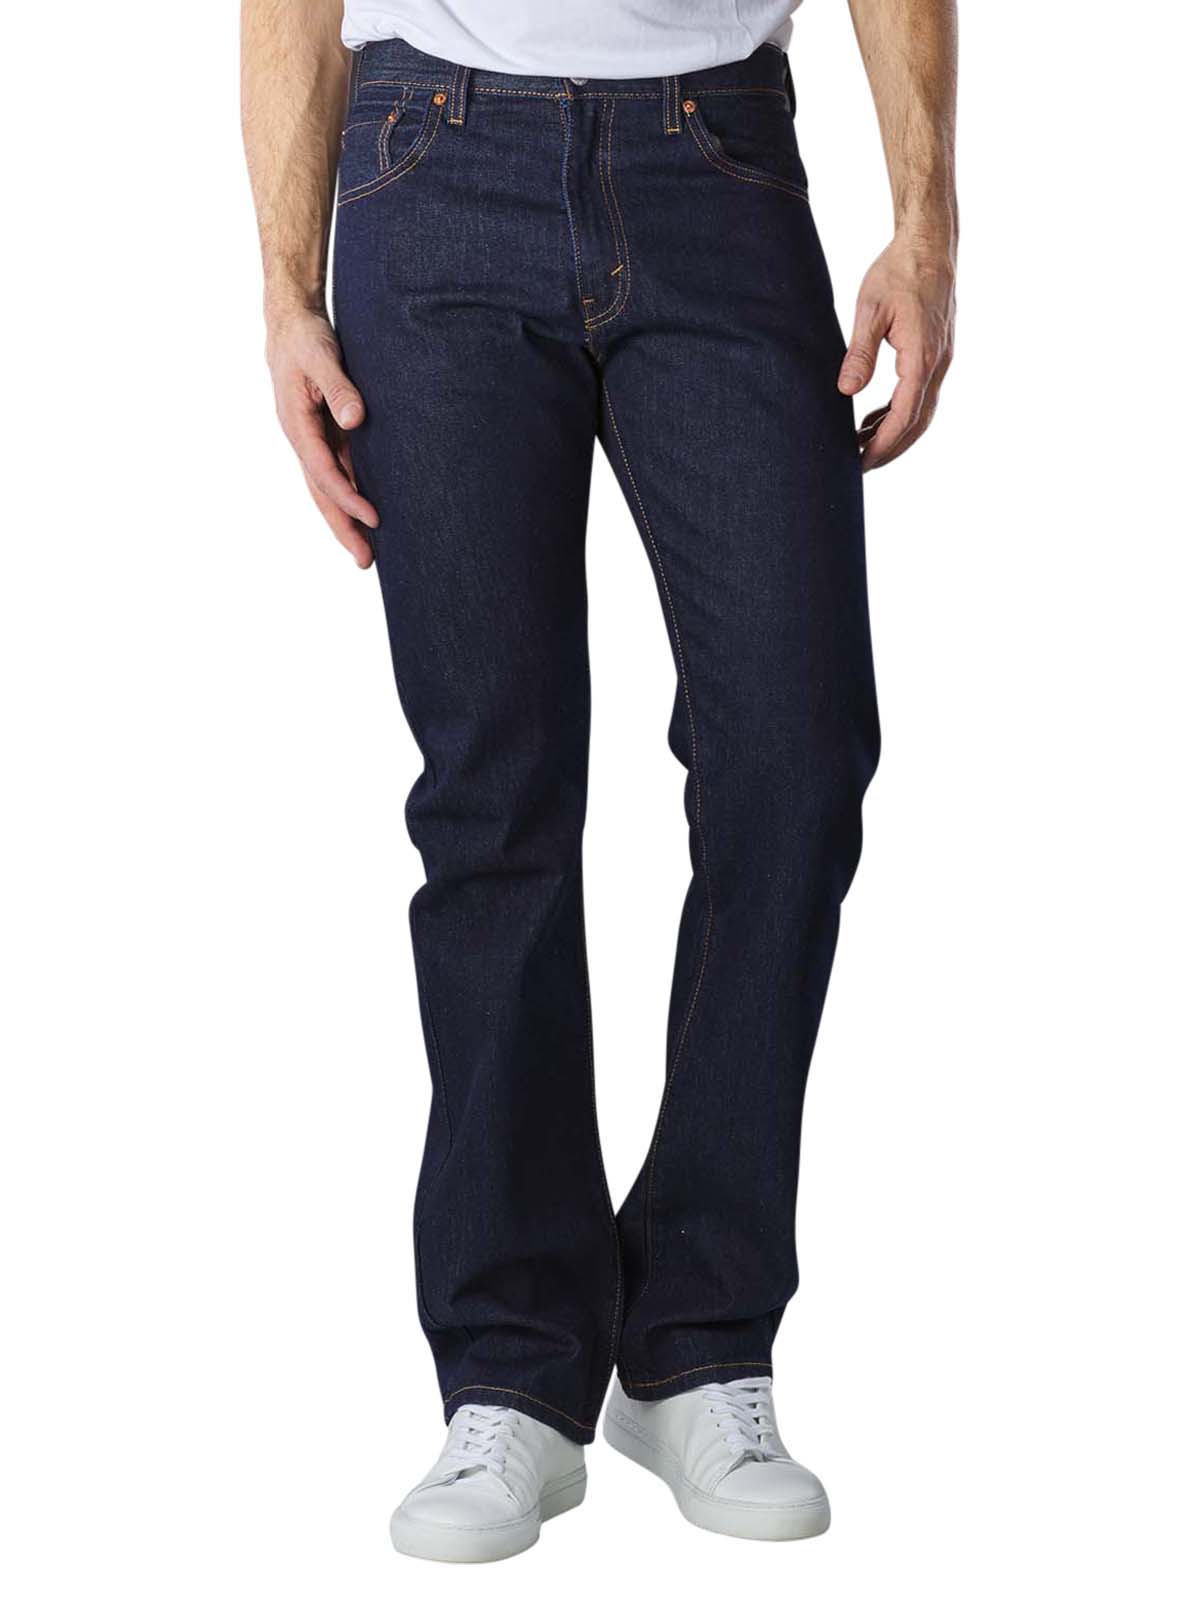 Levi's 517 Jeans Bootcut Fit rinse Levi's Men's Jeans | Free Shipping on   - SIMPLY LOOK GOOD